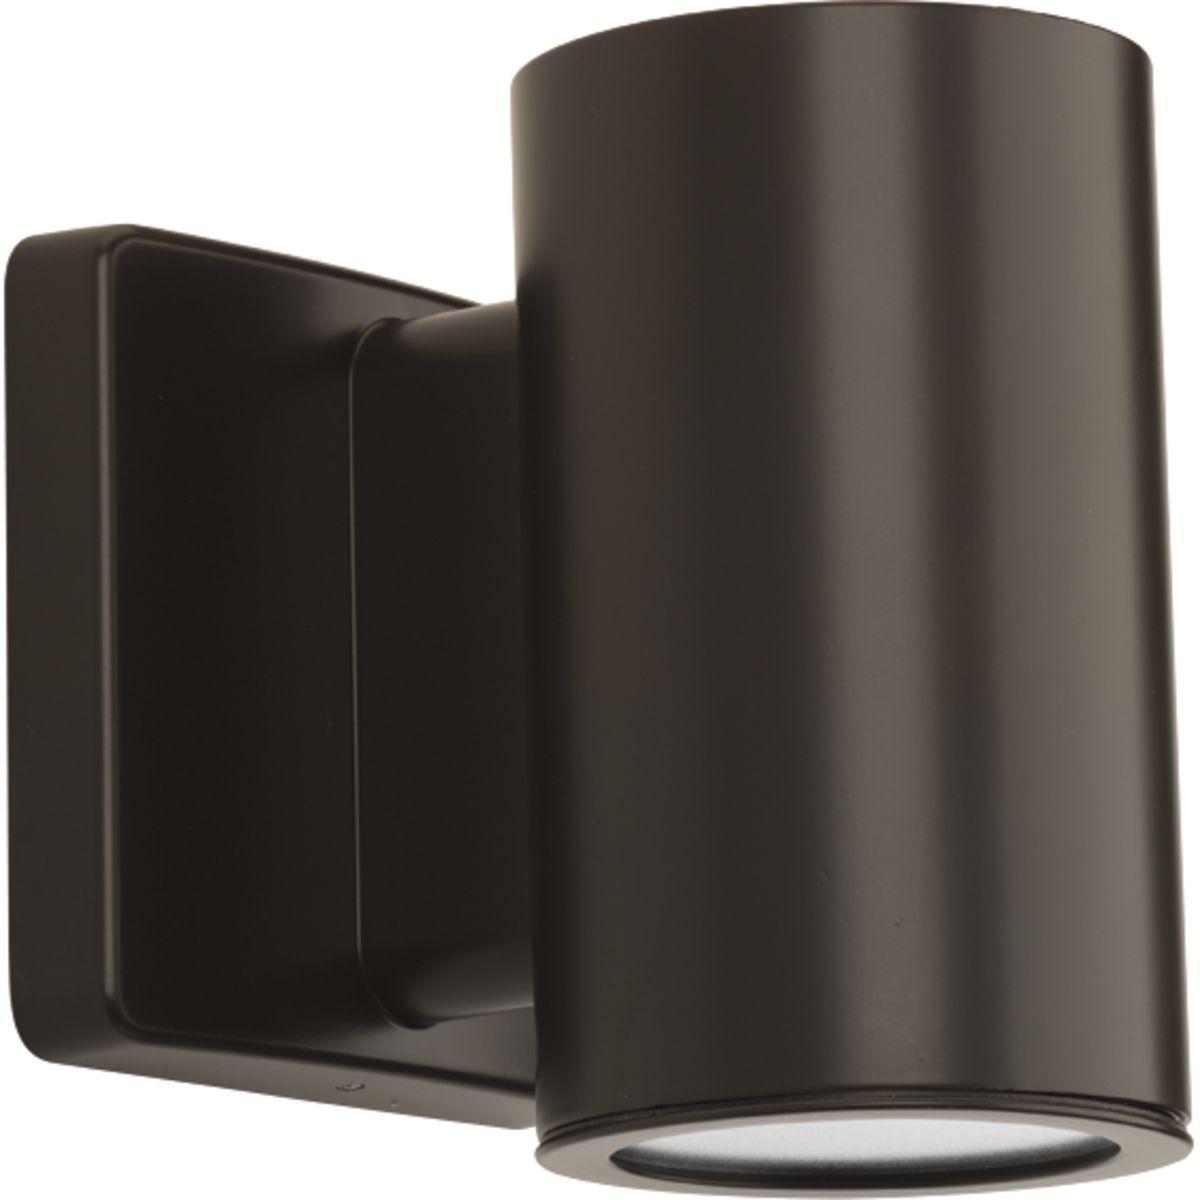 Hubbell P563000-020-30K Sleek, cylindrical forms in elegant finish selections. Die-cast aluminum wall brackets and heavy-duty aluminum framing. Fade and chip-resistant. CSA listed for wet locations. Can be used indoor or outdoor. Ideal for residential and commercial applications